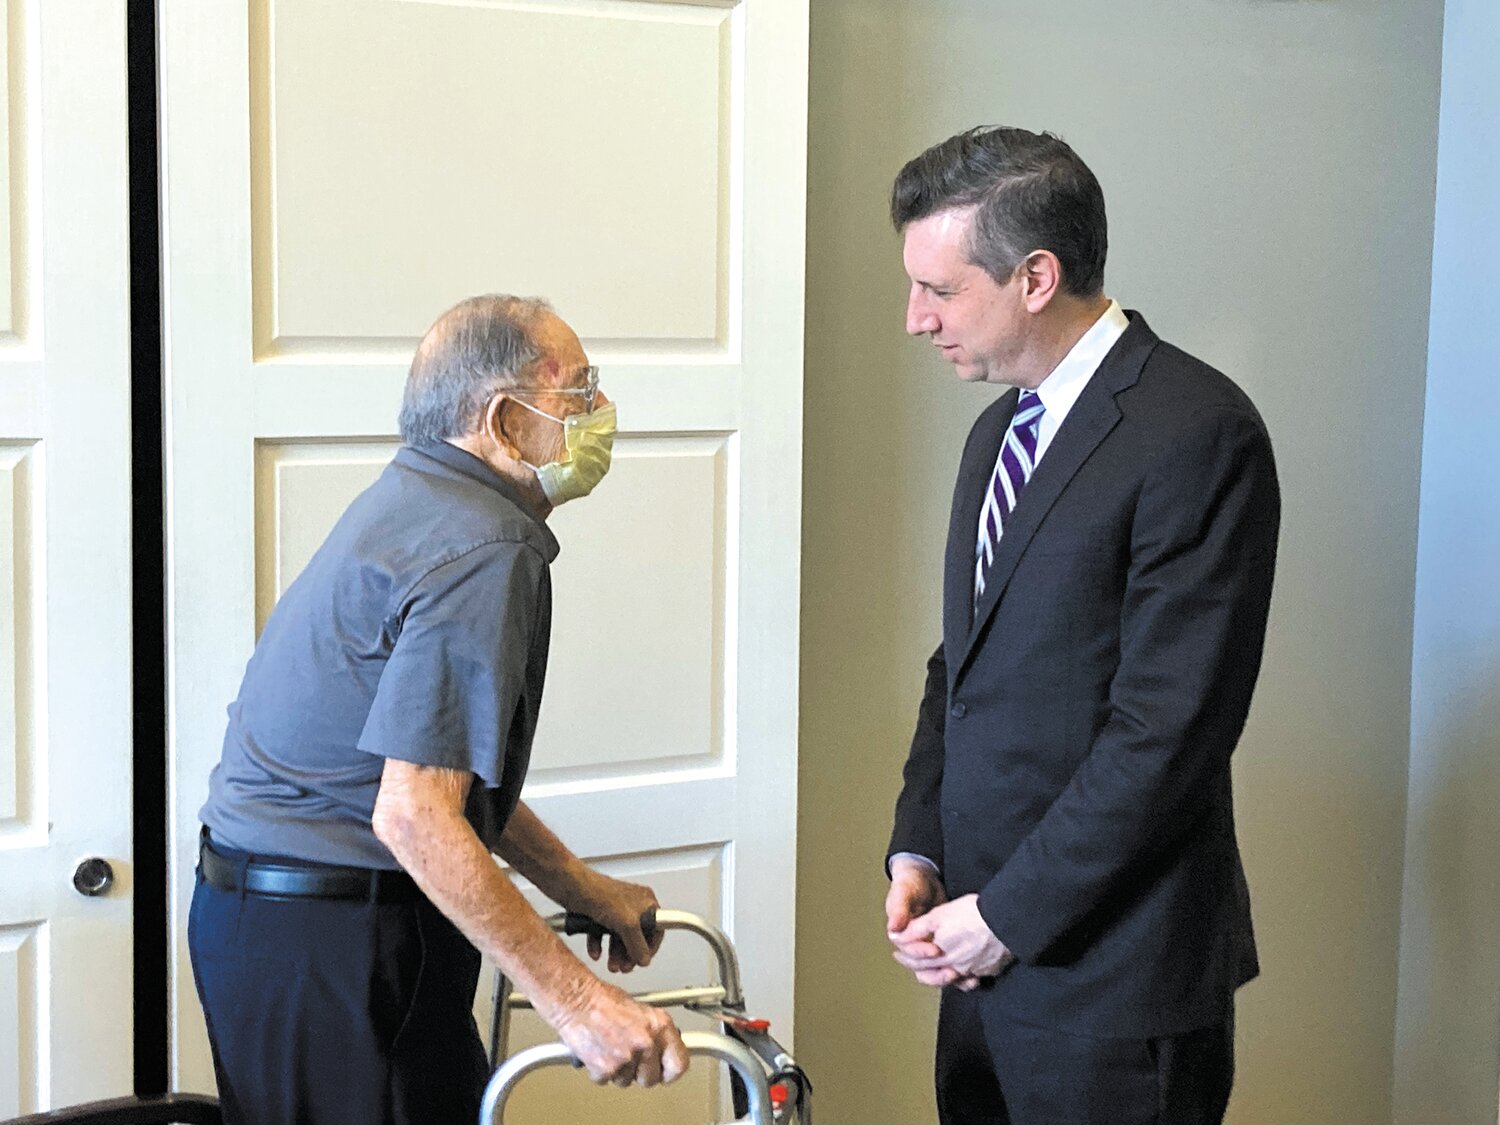 MEETING WITH ATTENDEES: Anthony Russo, a resident of Greenwich Farms, greets Magaziner as he walks into the room.